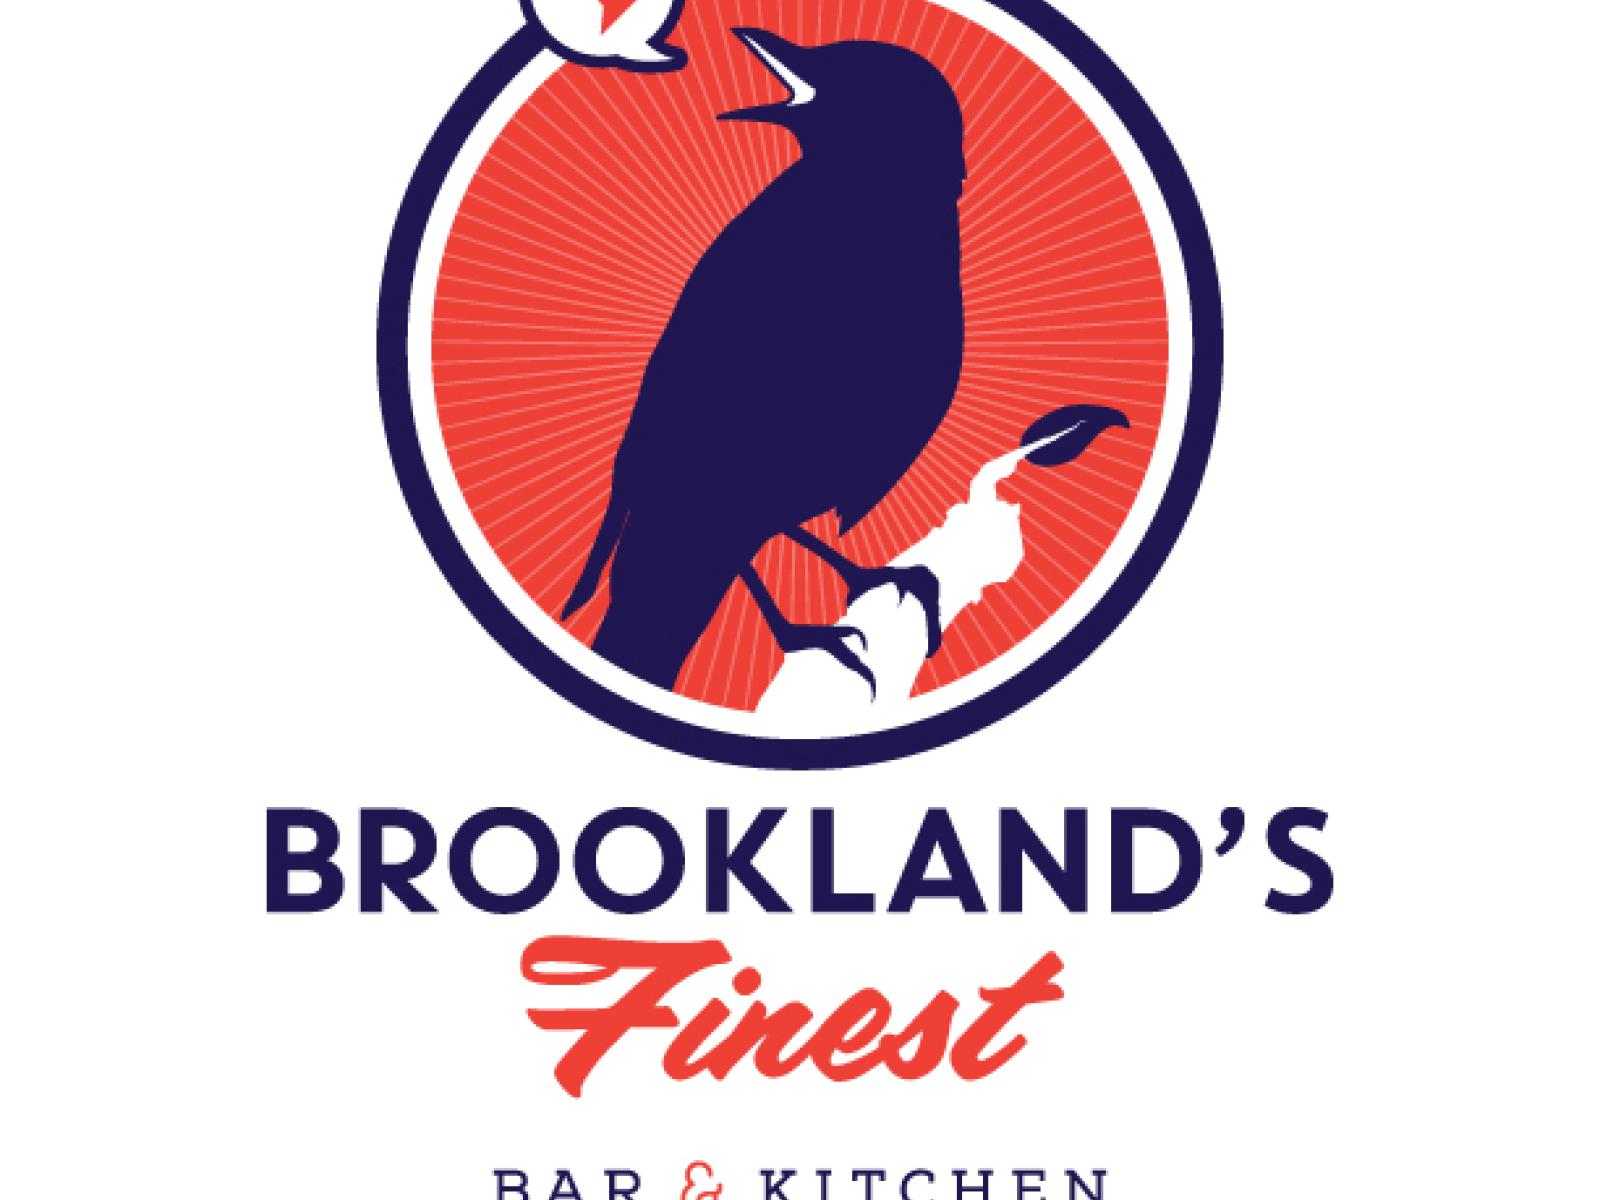 Main image for business titled Brookland's Finest Bar & Kitchen